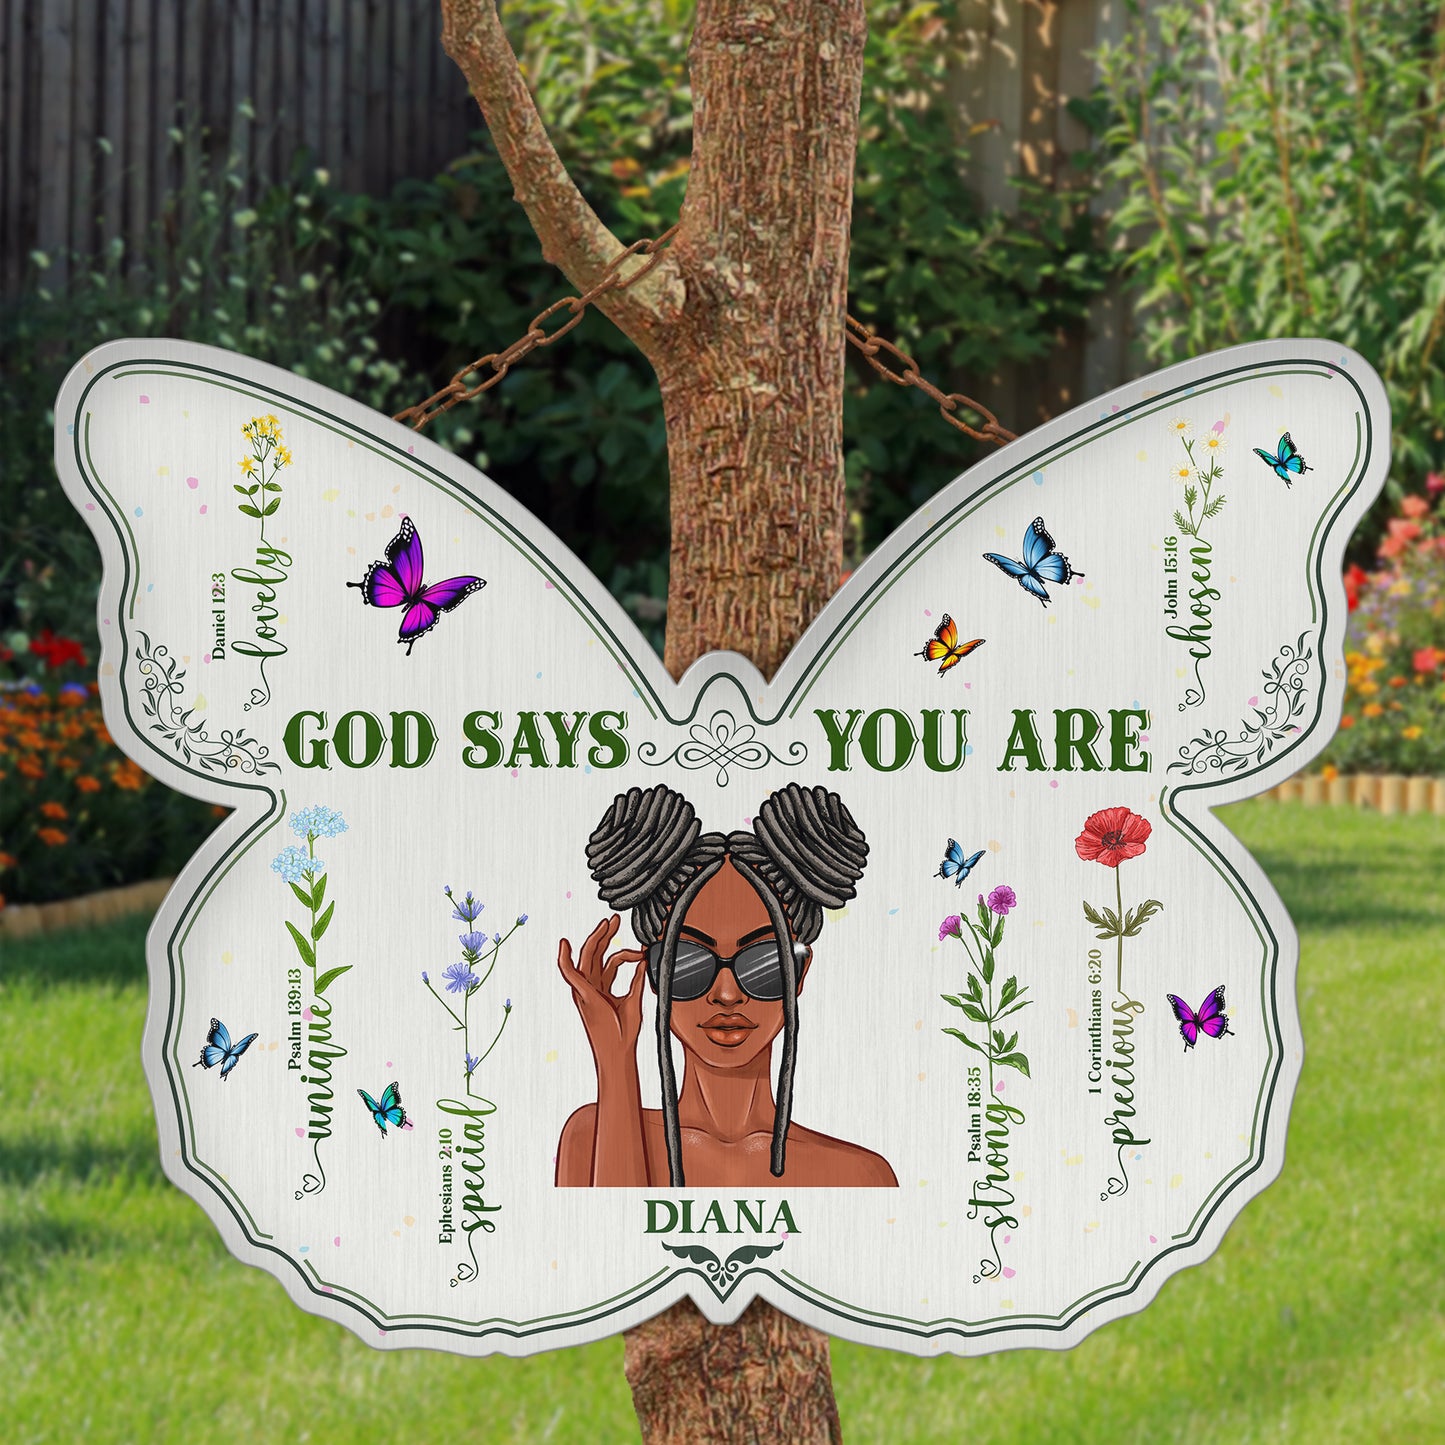 God Says You Are Beautiful - Personalized Butterfly Shaped Metal Sign - Home Decor Gift Birthday Gift For Black Woman, Daughter, Sister